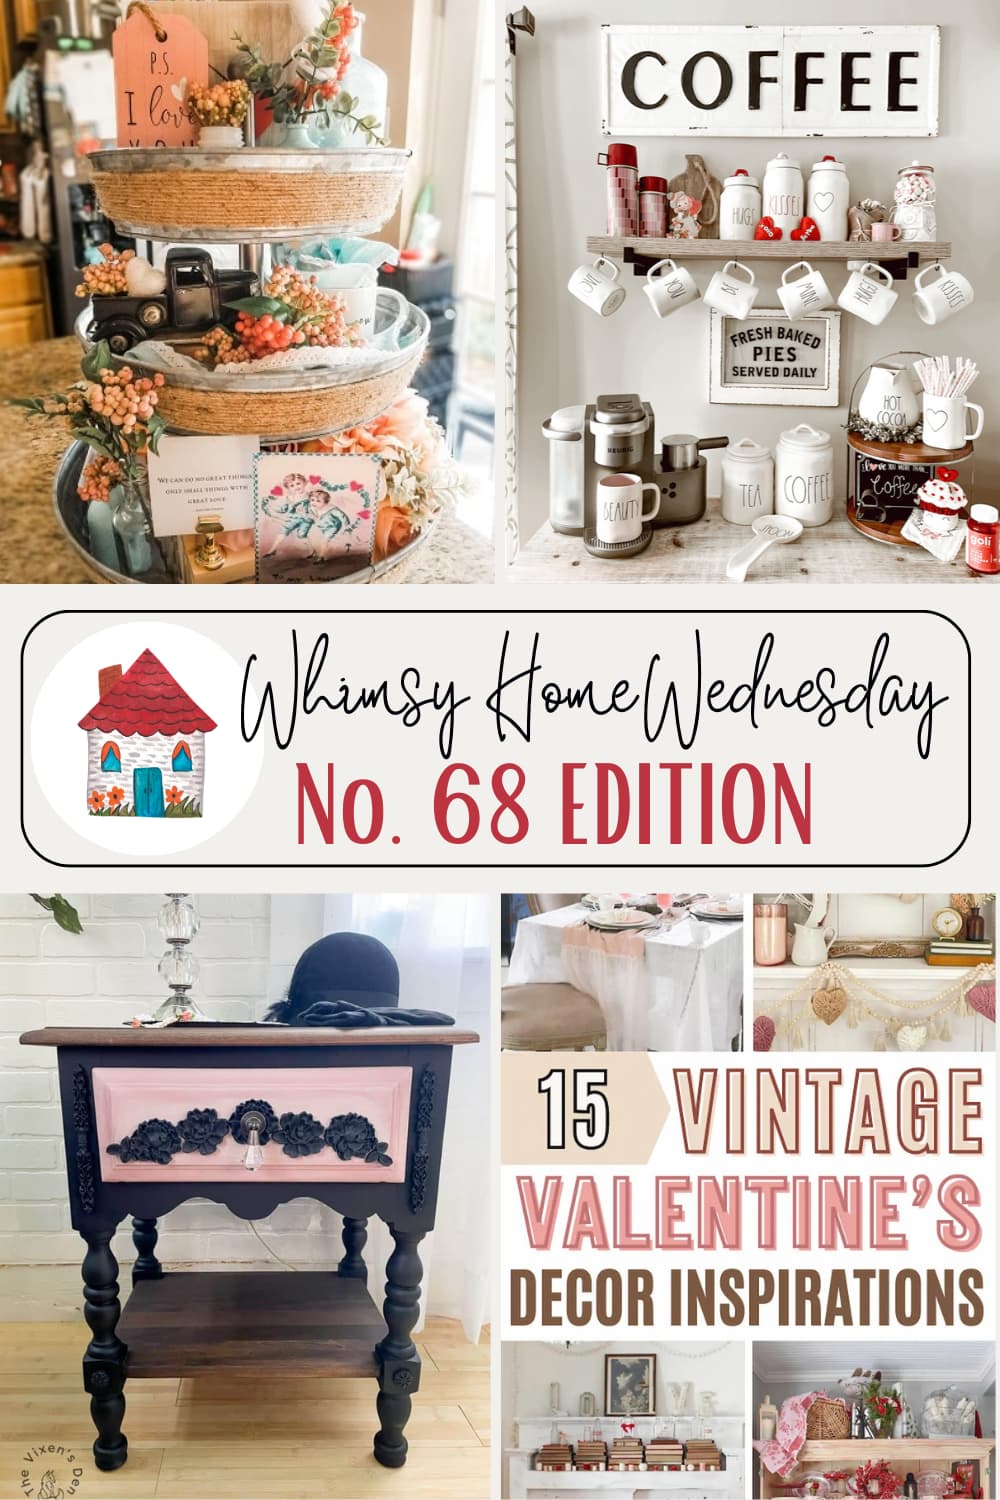 Join us on Whimsy Home Wednesday Blog Link Party No. 68 and see host projects, the features from the previous week and link up your posts!